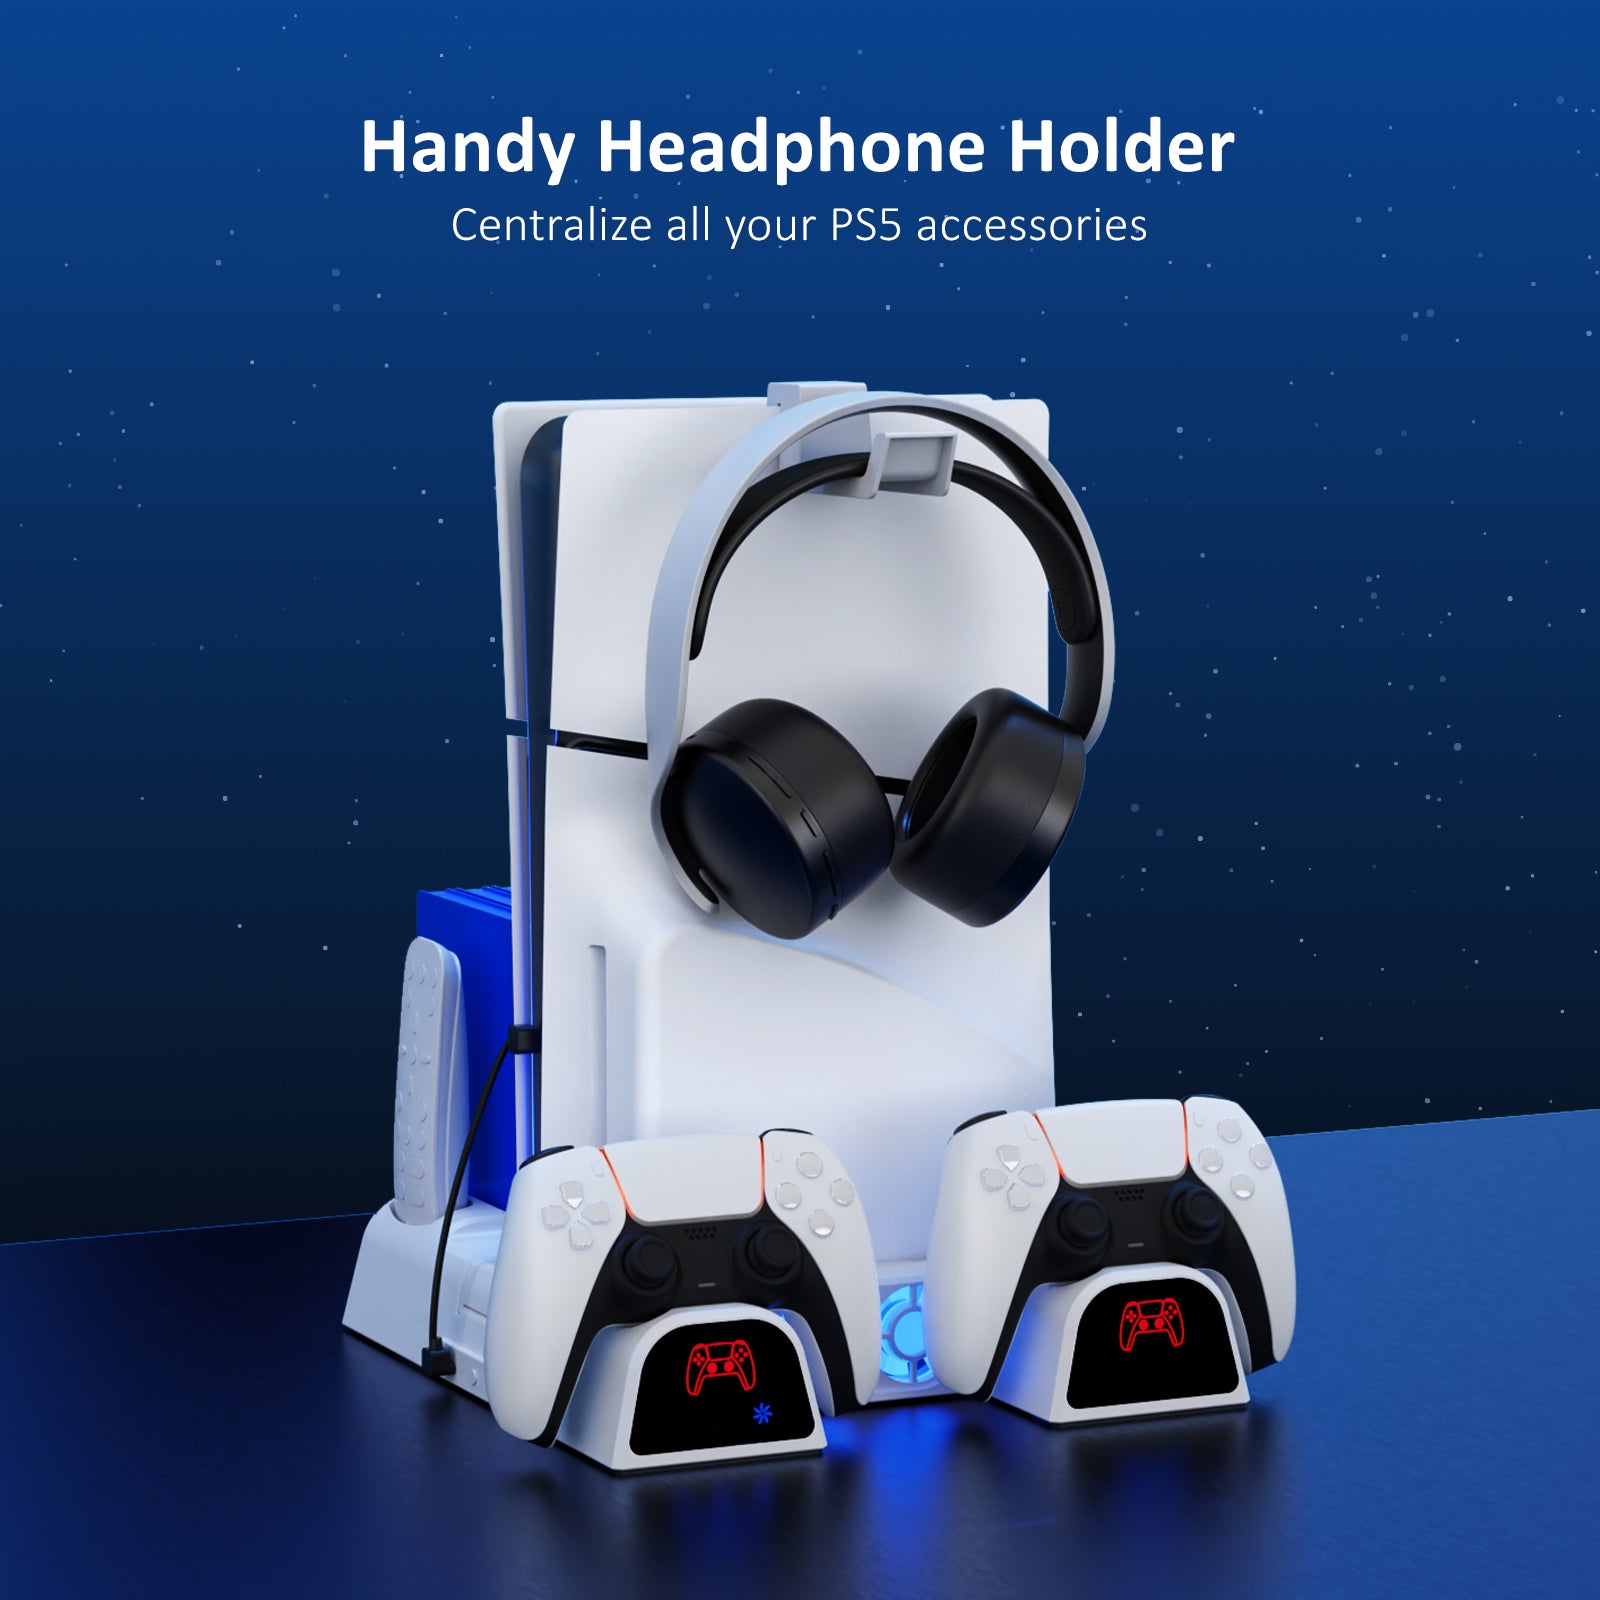 The product also comes with an additional headphone hook.